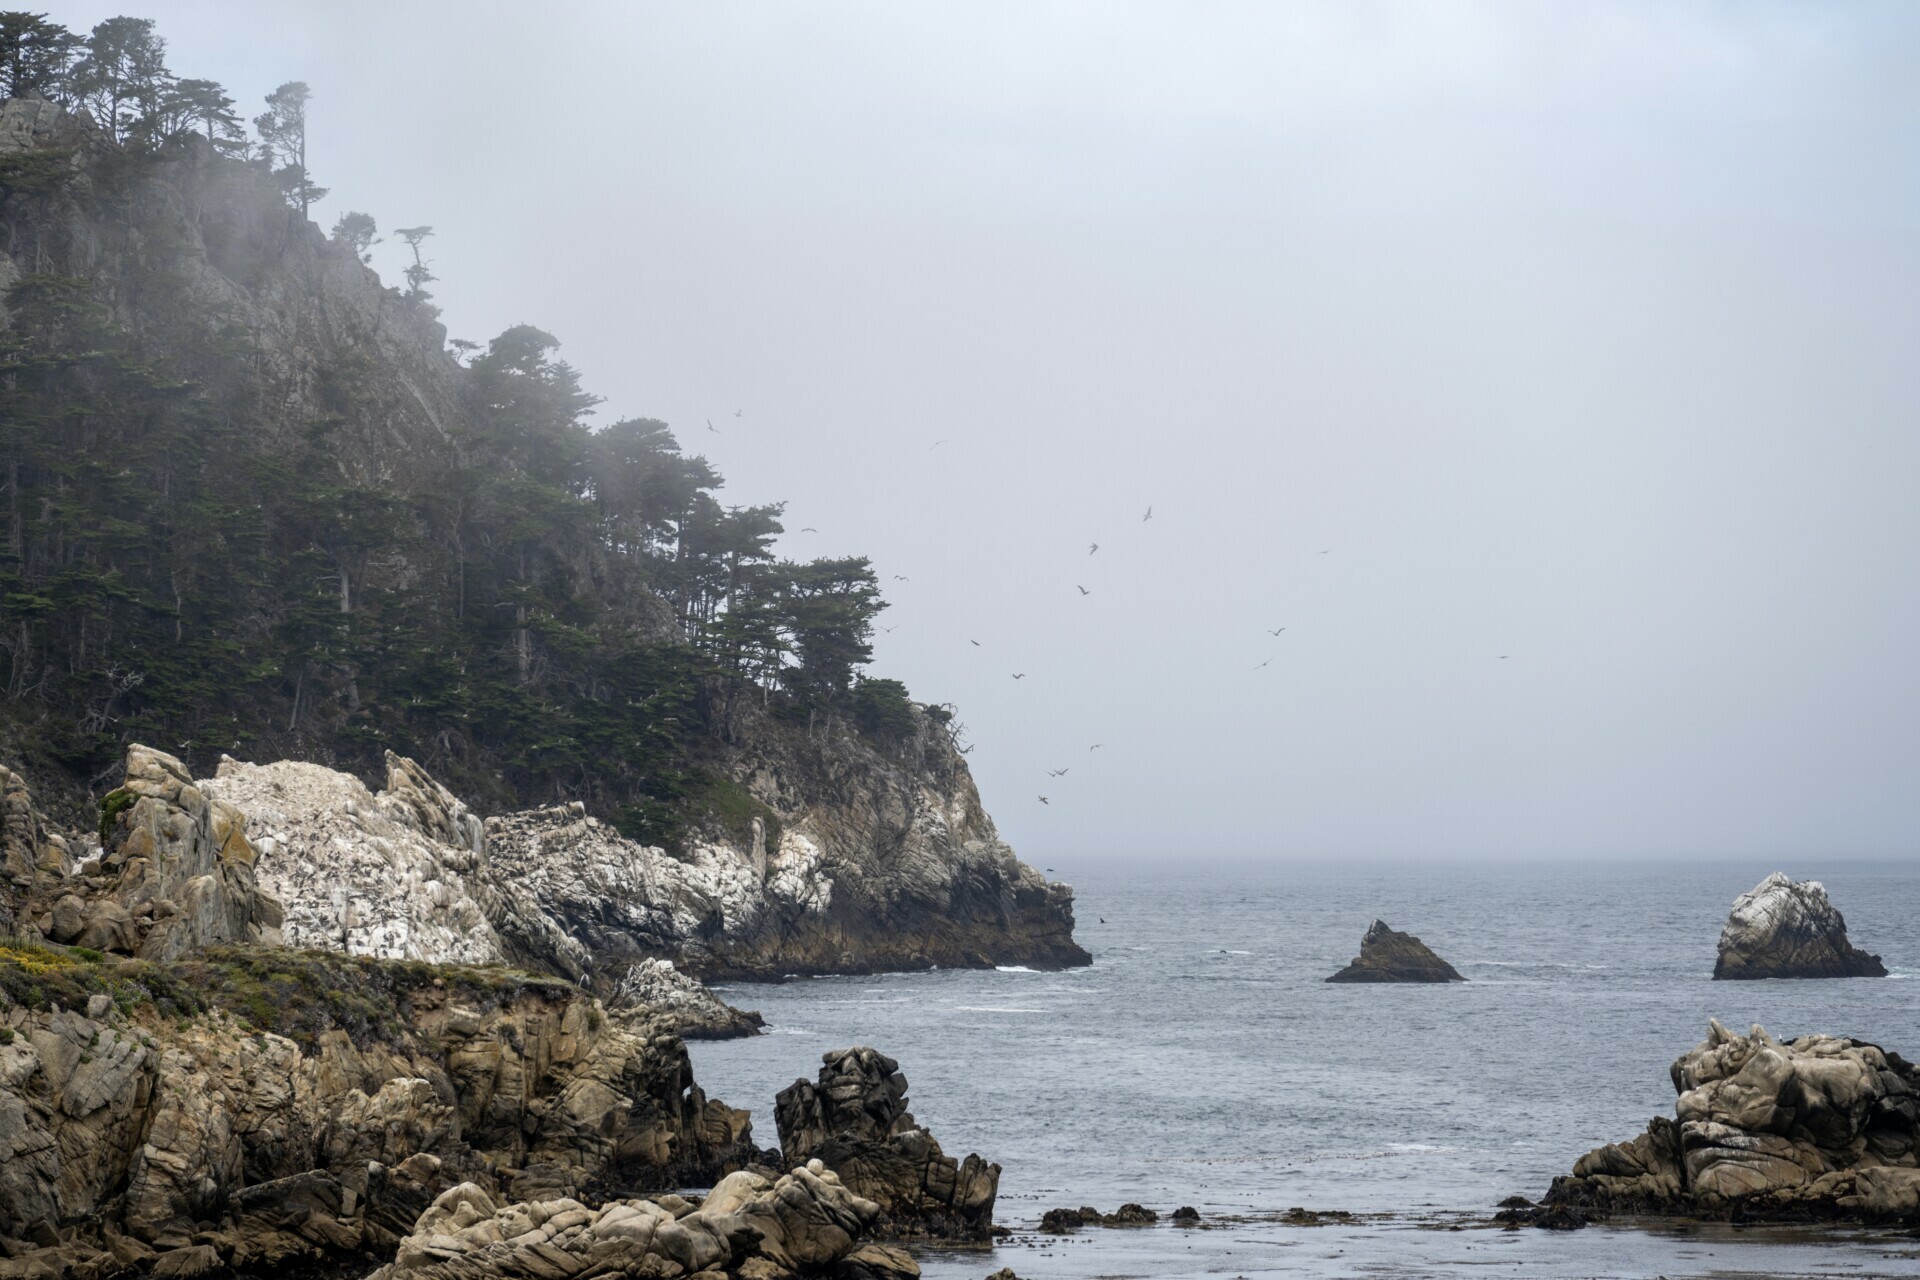 A foggy seascape at Pebble Beach with birds soaring over rocky cliffs and pine trees, with isolated sea stacks.